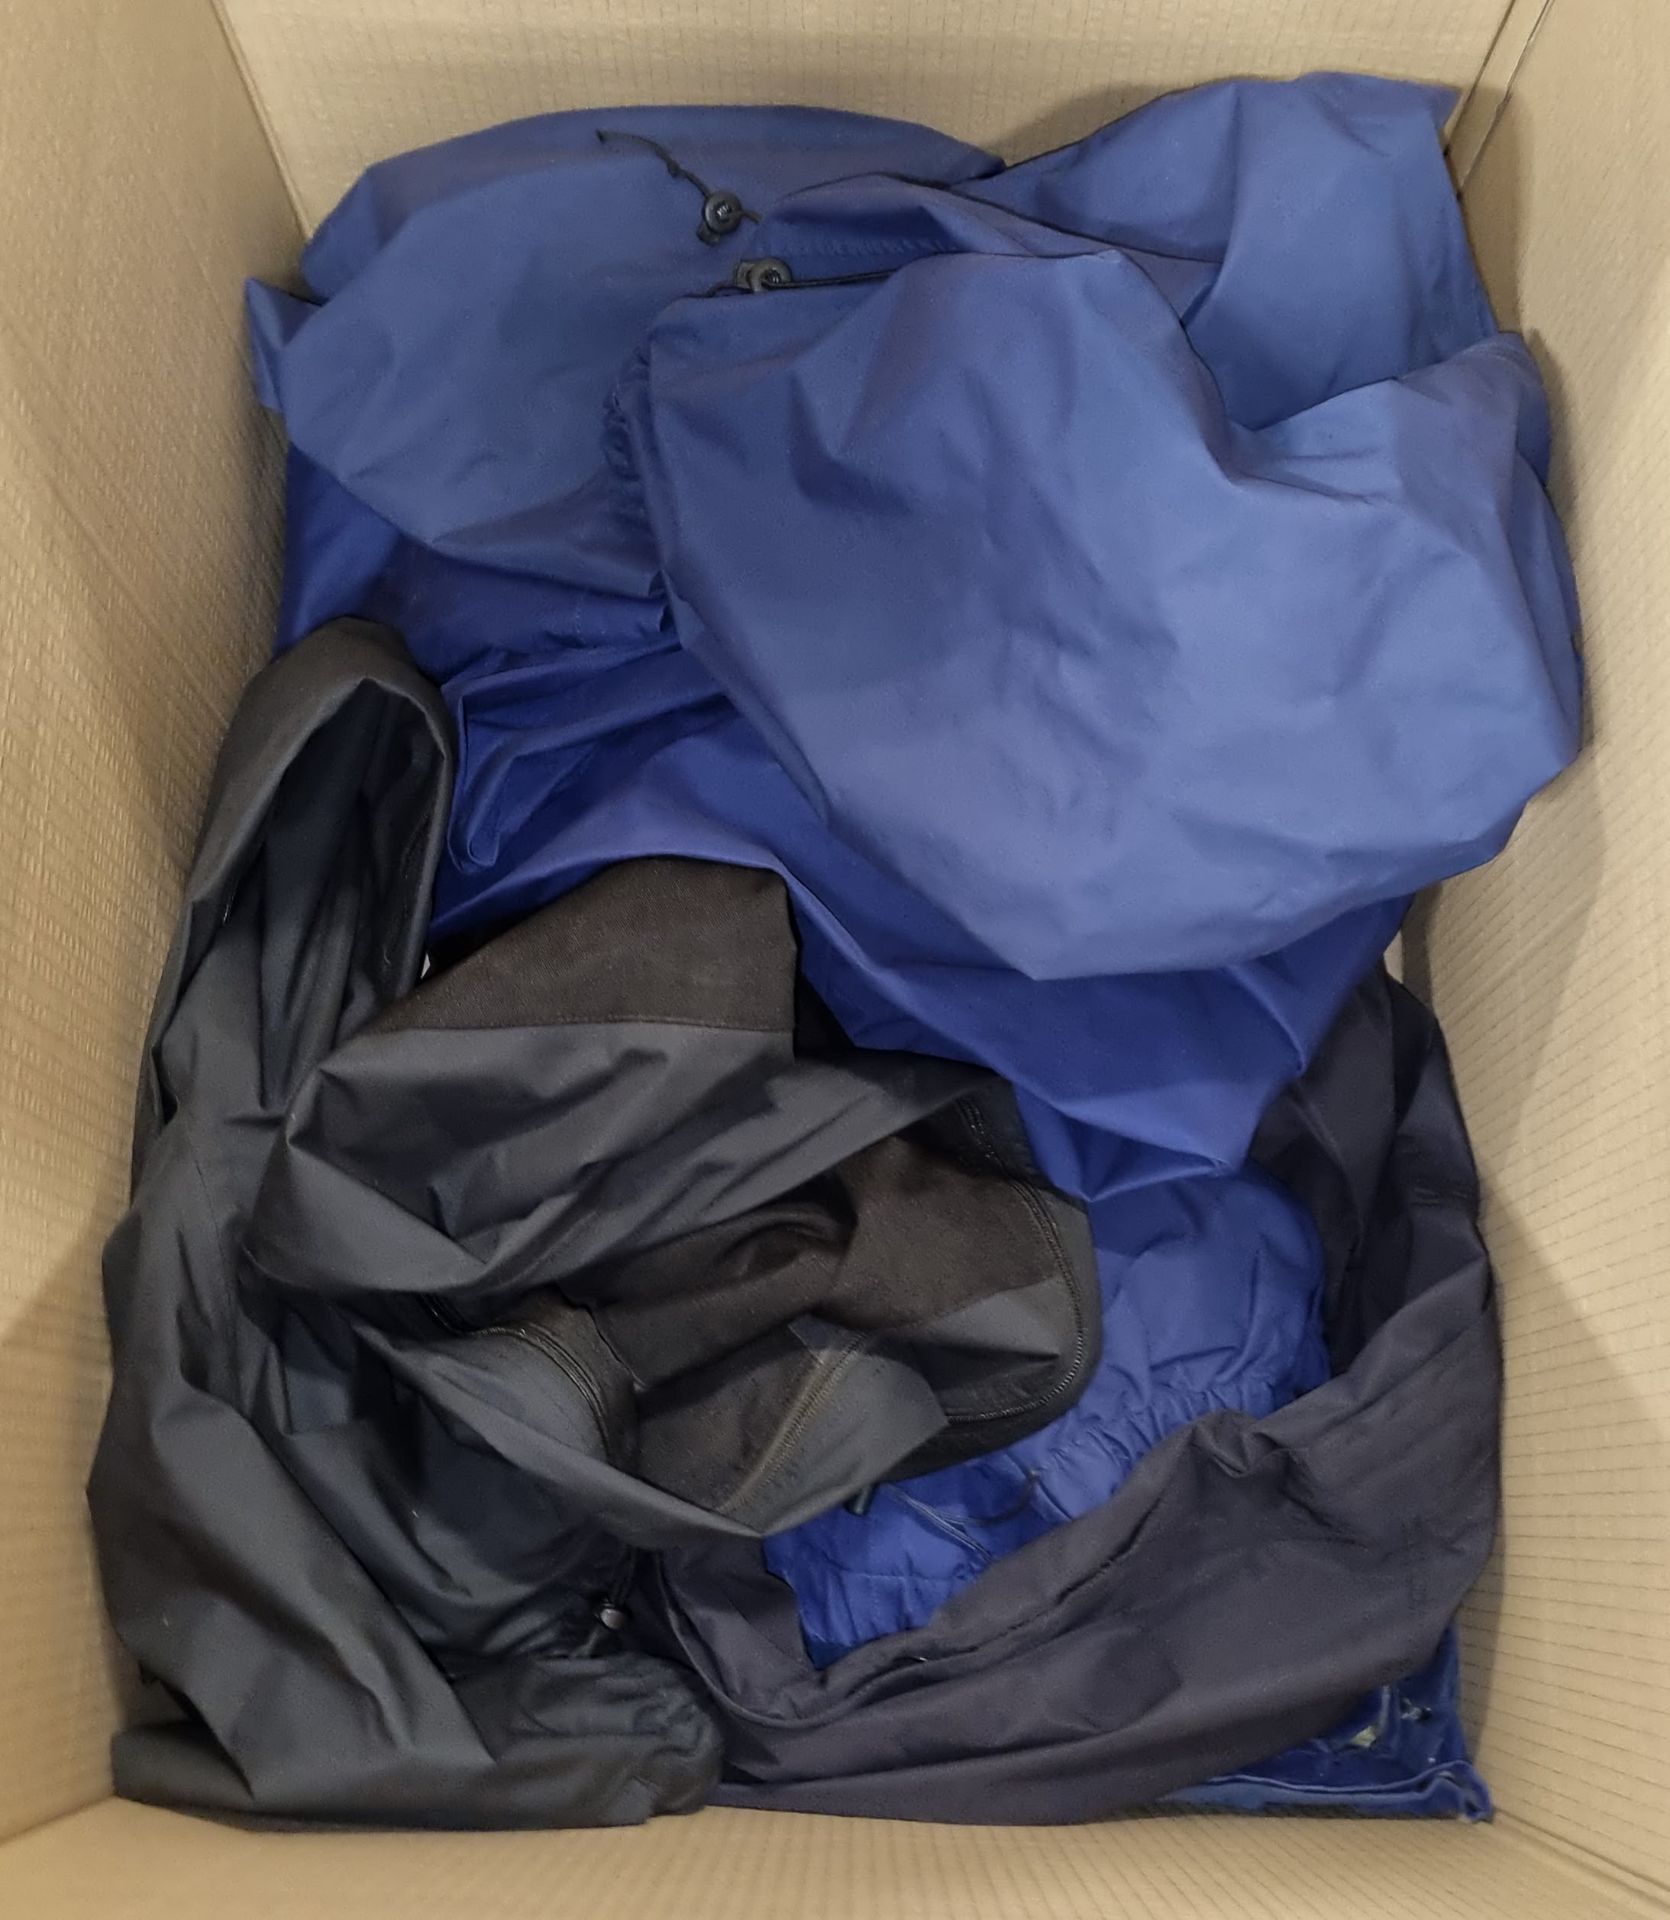 19x pairs of Hiking trousers with Gore-tex - Mountain & Rab - mixed grades and sizes - Image 3 of 3